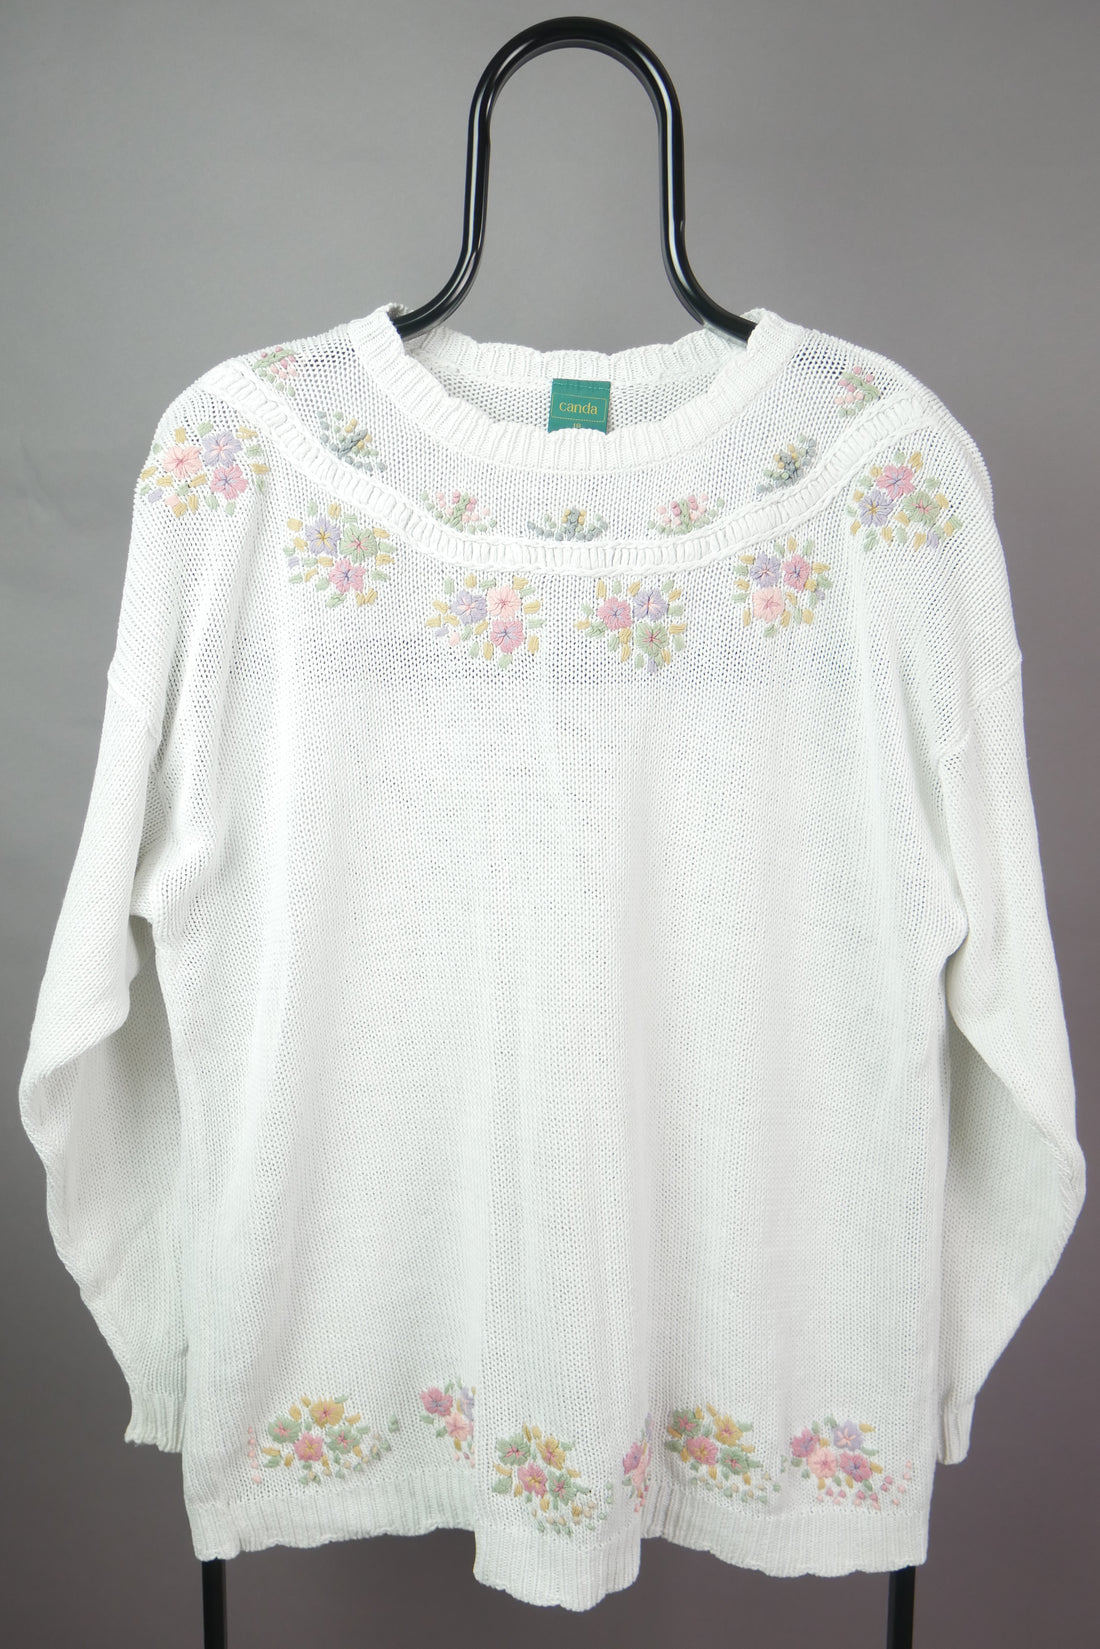 The Floral Embroidered Jumper (Women's L)